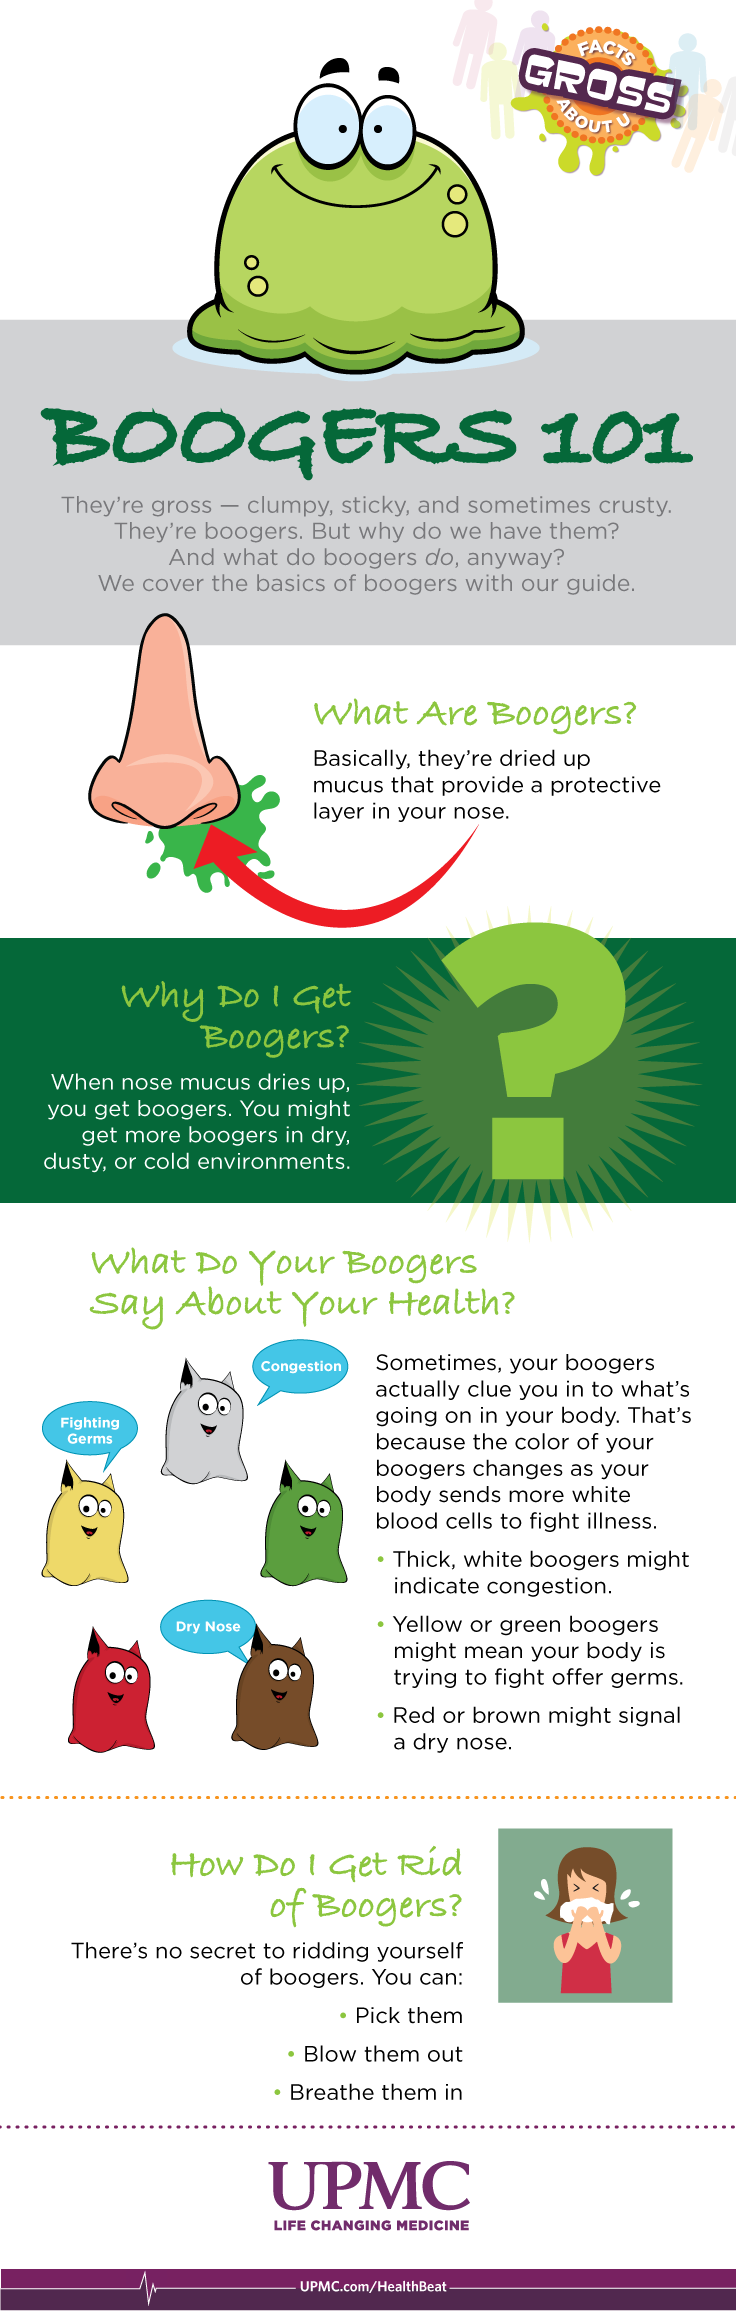 Learn about what boogers are and how you can get rid of them